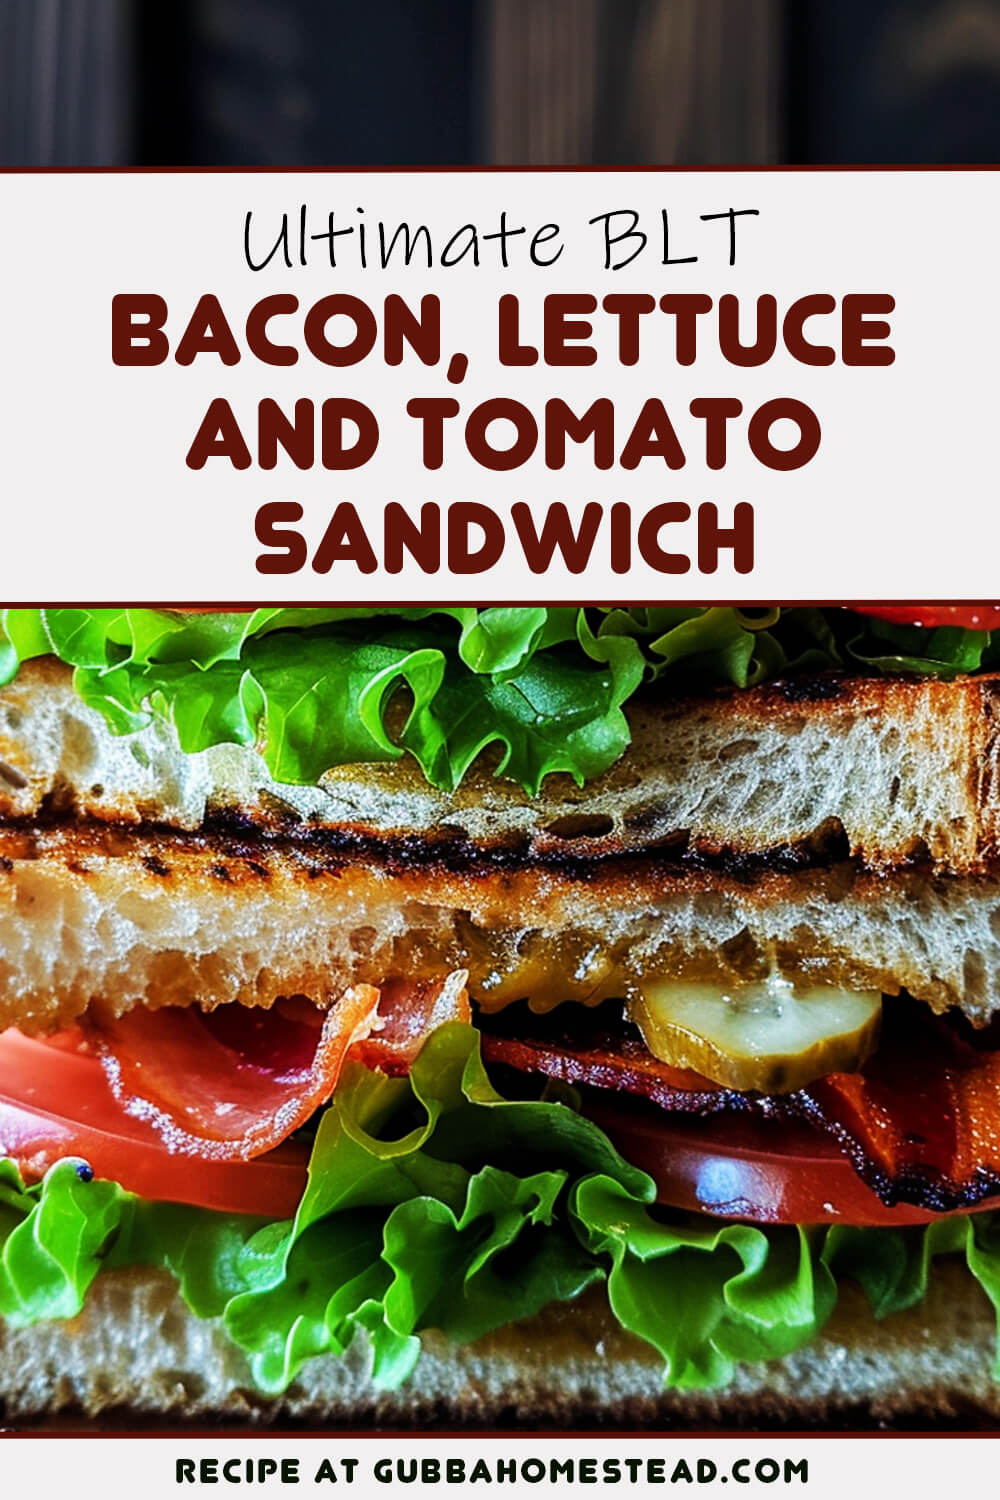 The Ultimate Bacon, Lettuce, and Tomato (BLT) Sandwich